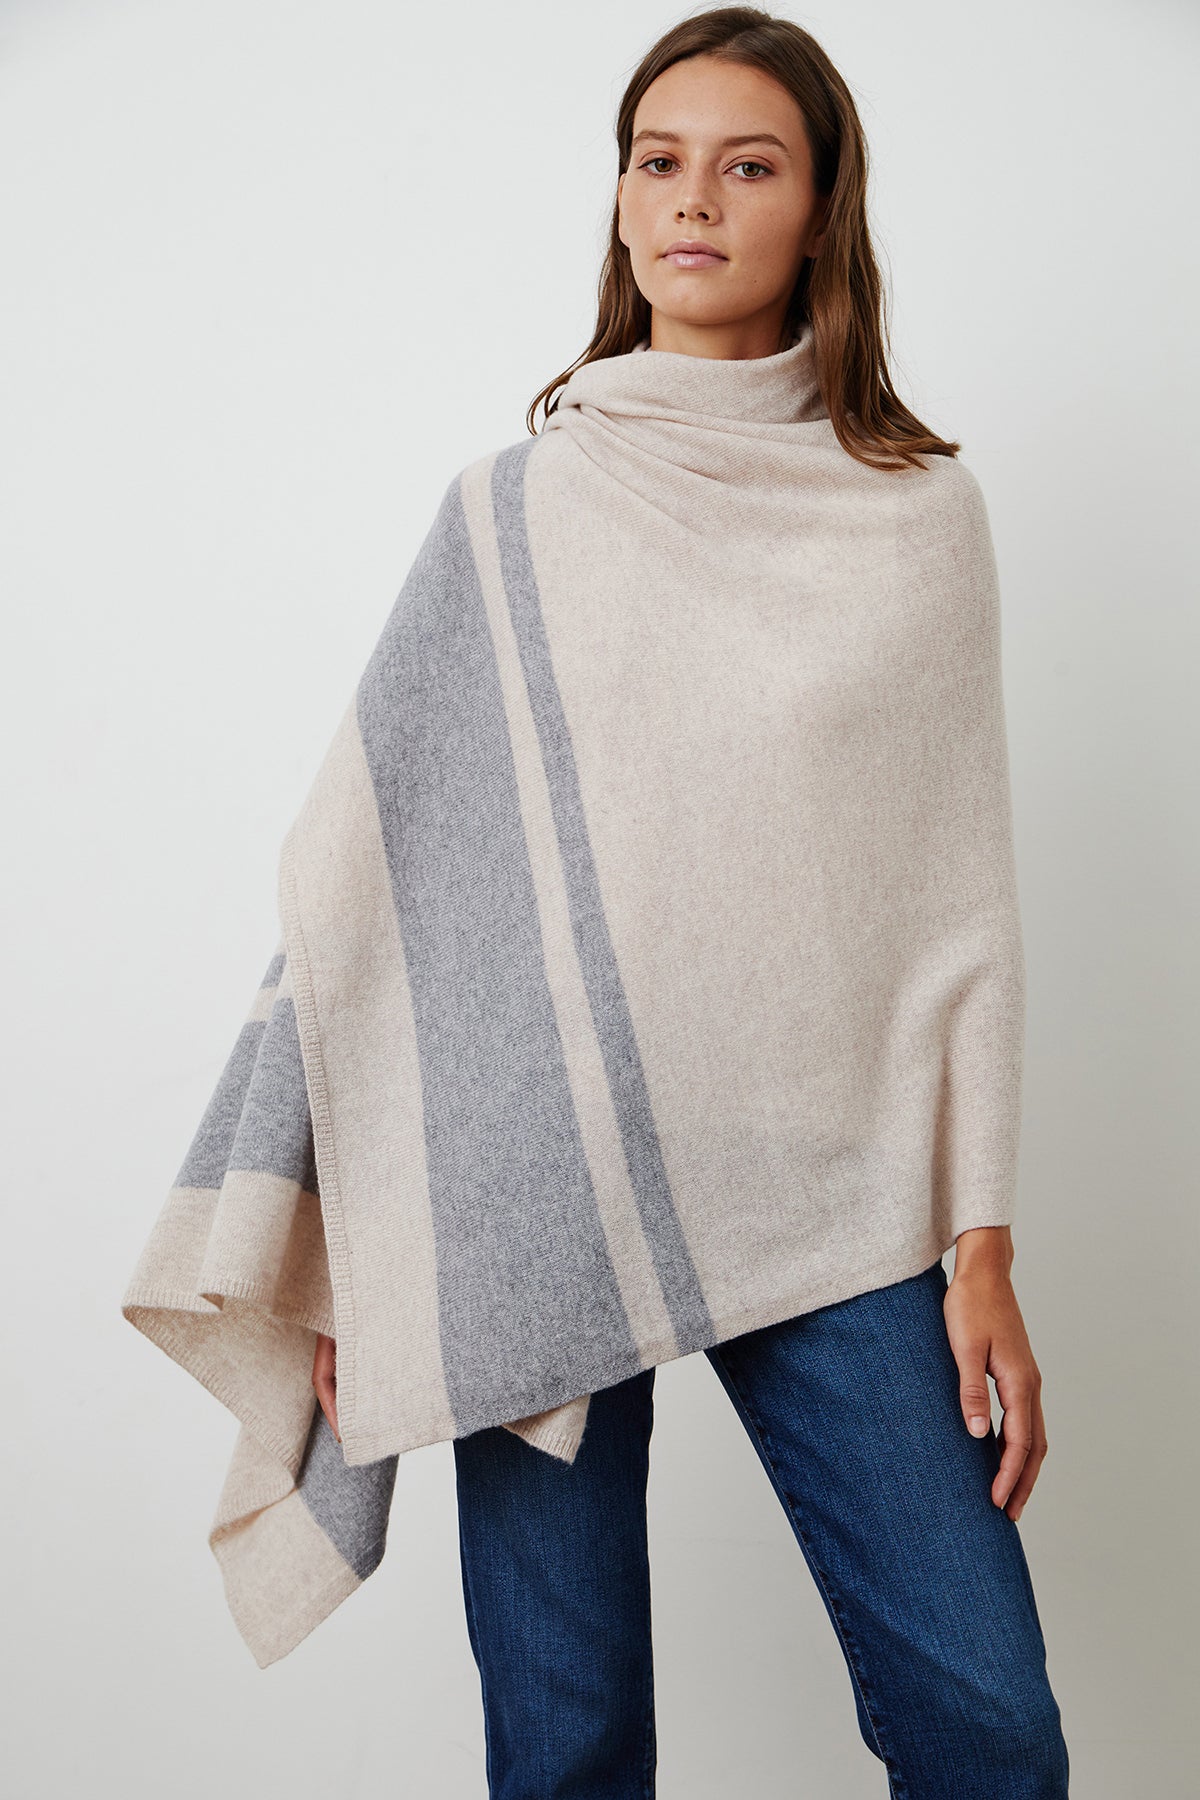 A cozy woman wearing a Jenny Graham Home LIV Cashmere Throw Blanket.-15230754160833